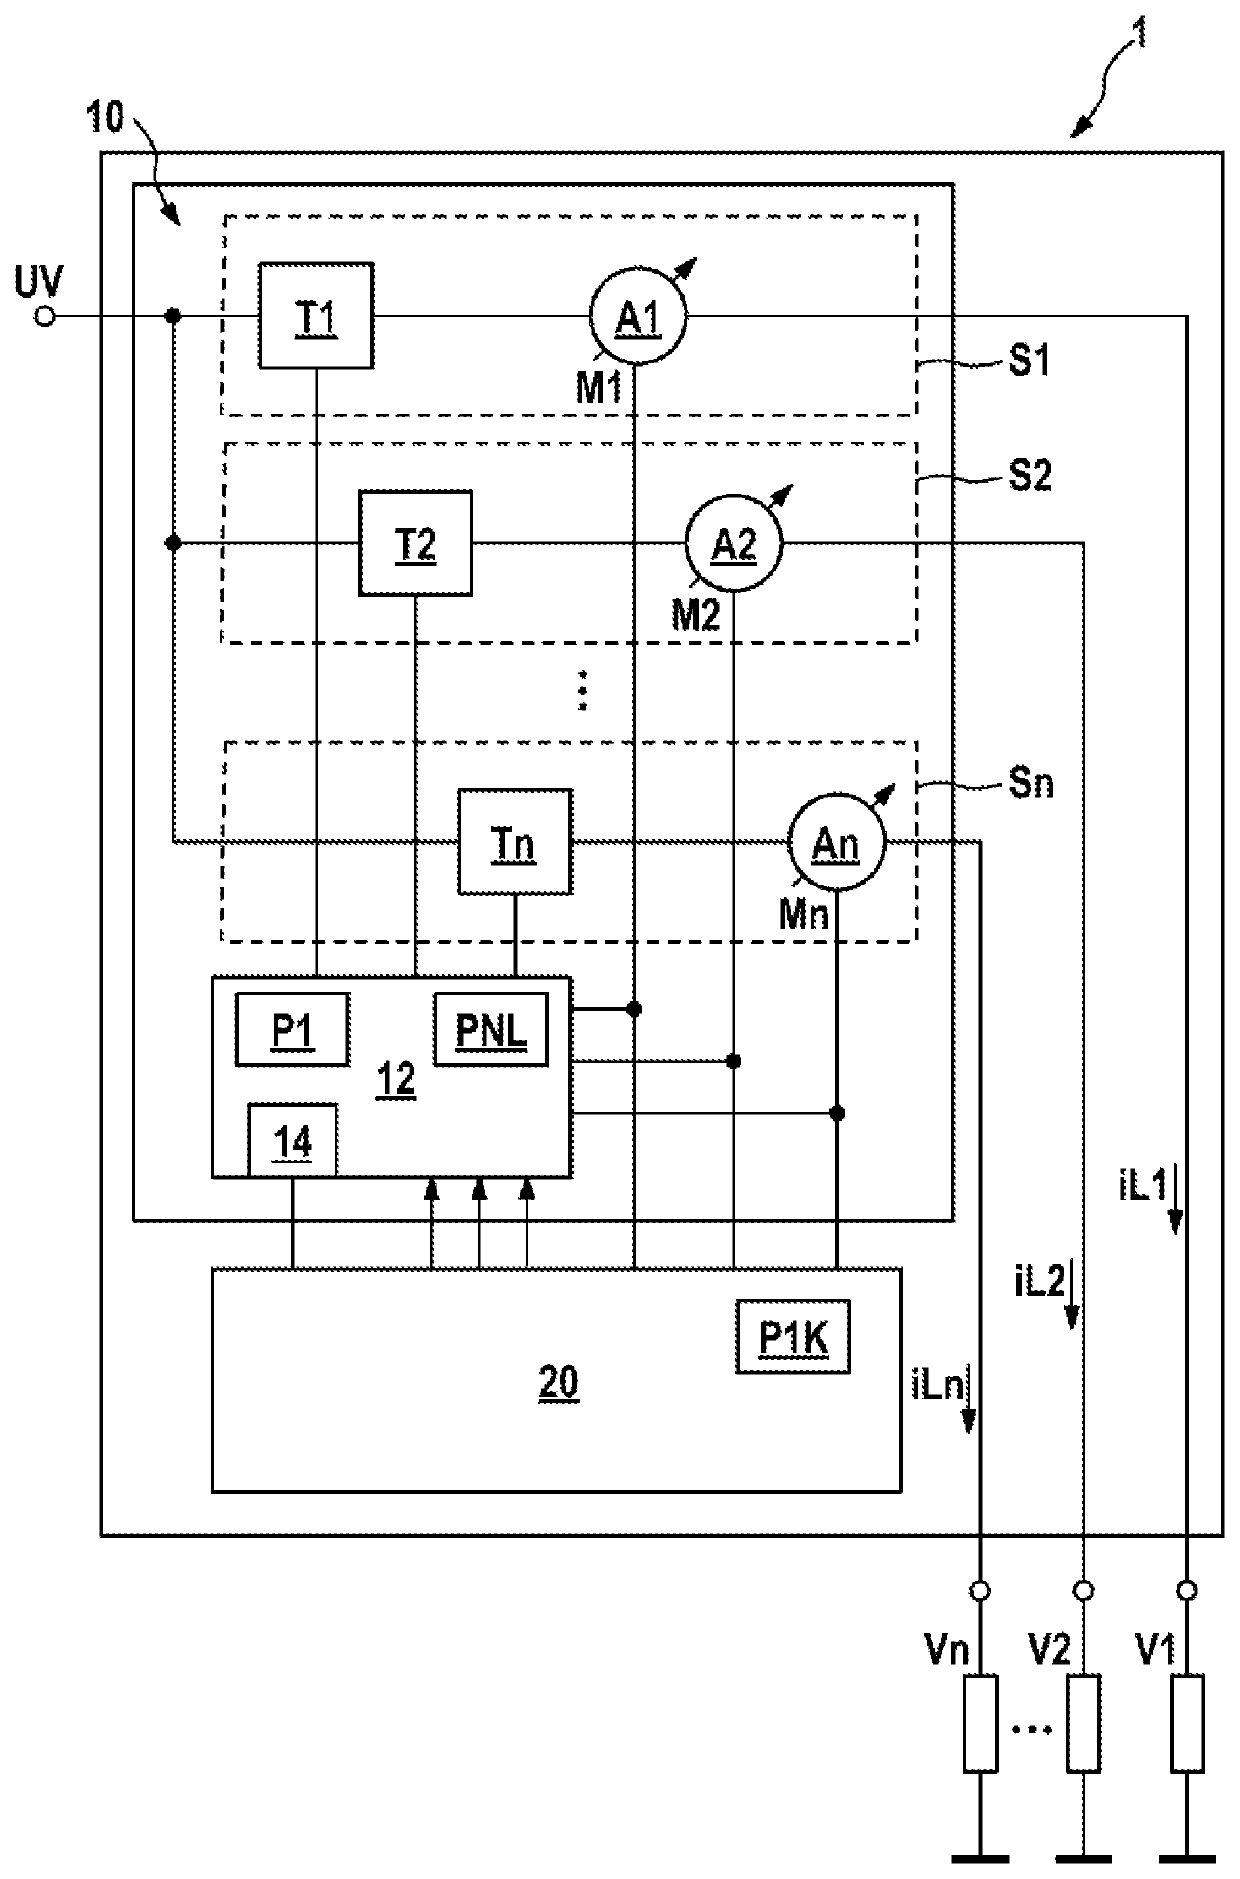 Fuse system for at least one load of a vehicle